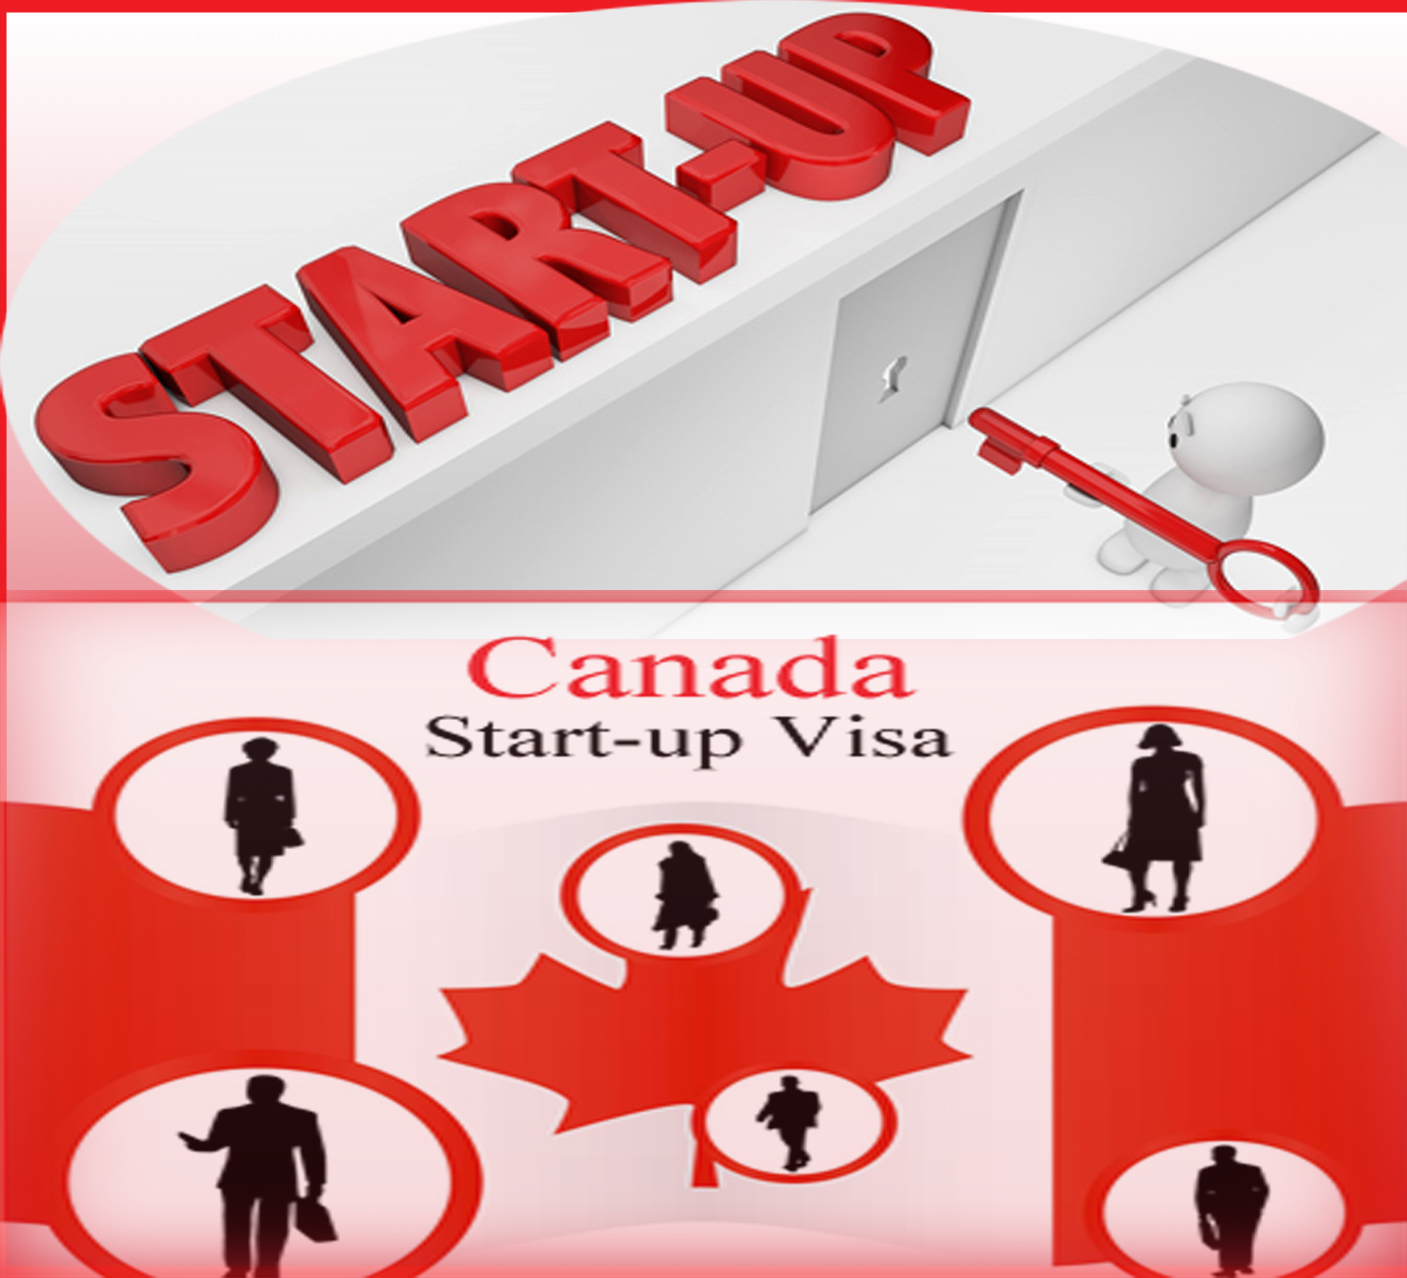 One can enjoy numerous benefits with Startup Visa Program